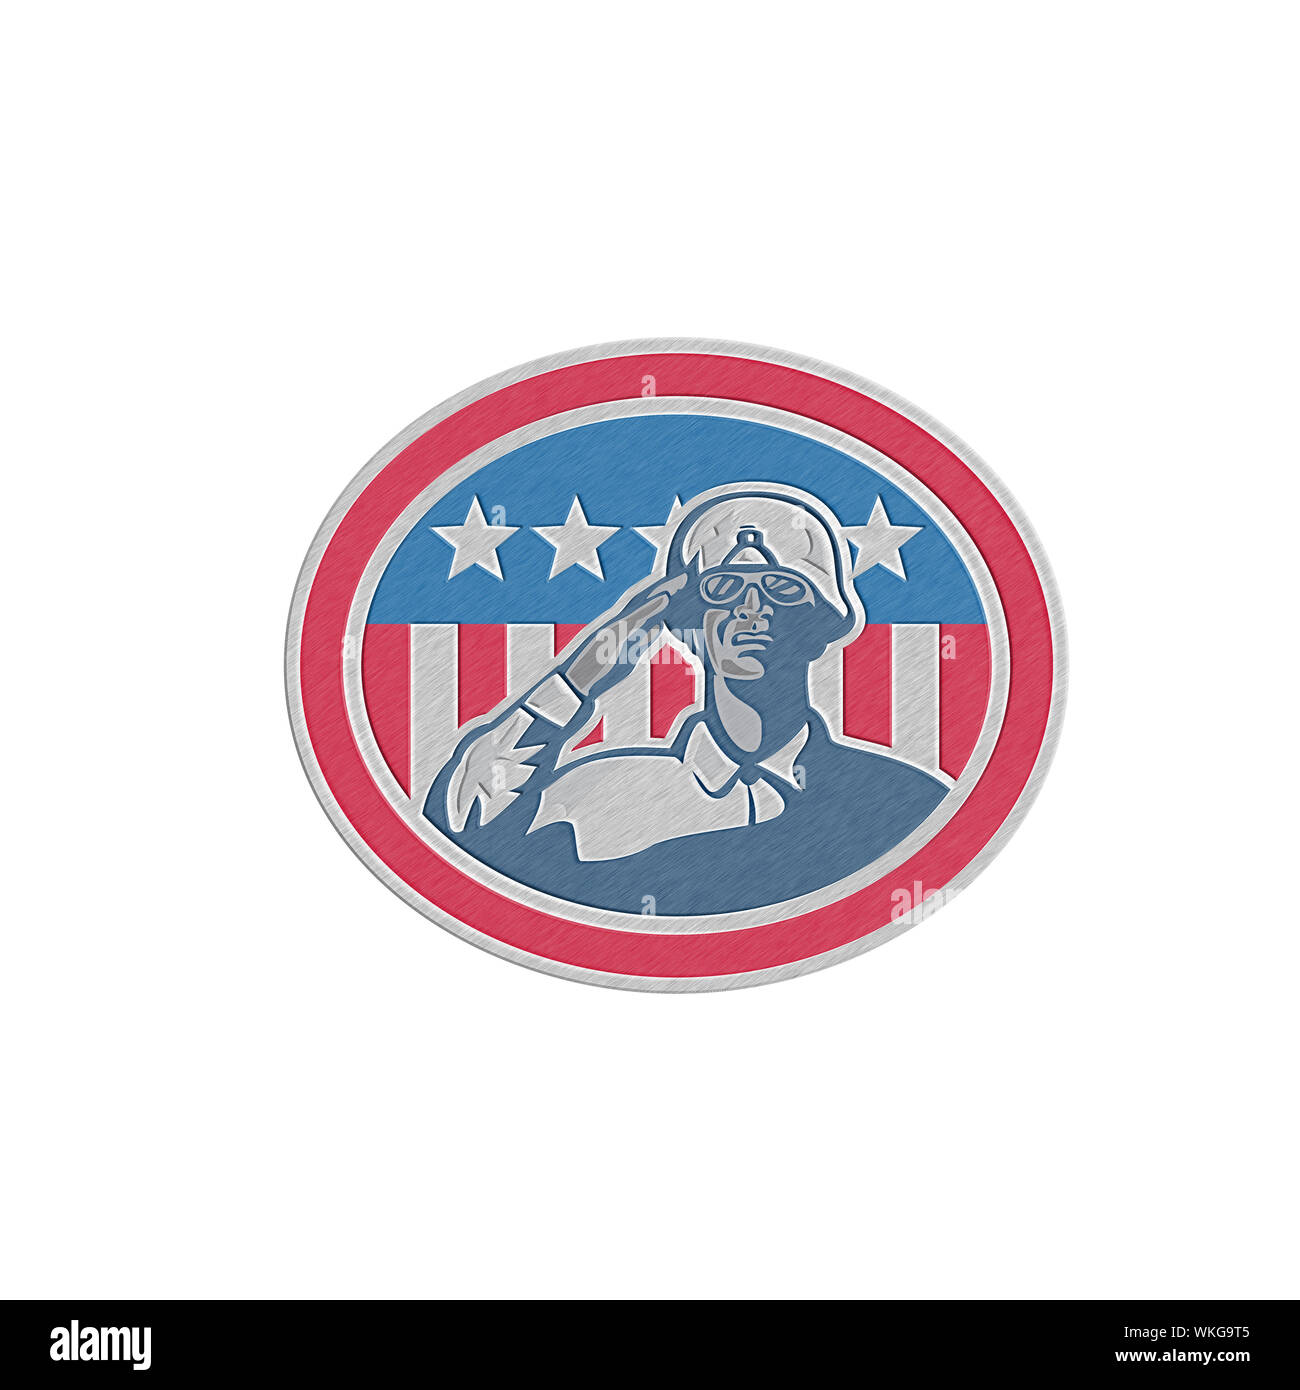 Metallic styled illustration of an african-american soldier serviceman saluting with USA stars and stripes flag in background set inside oval done in Stock Photo